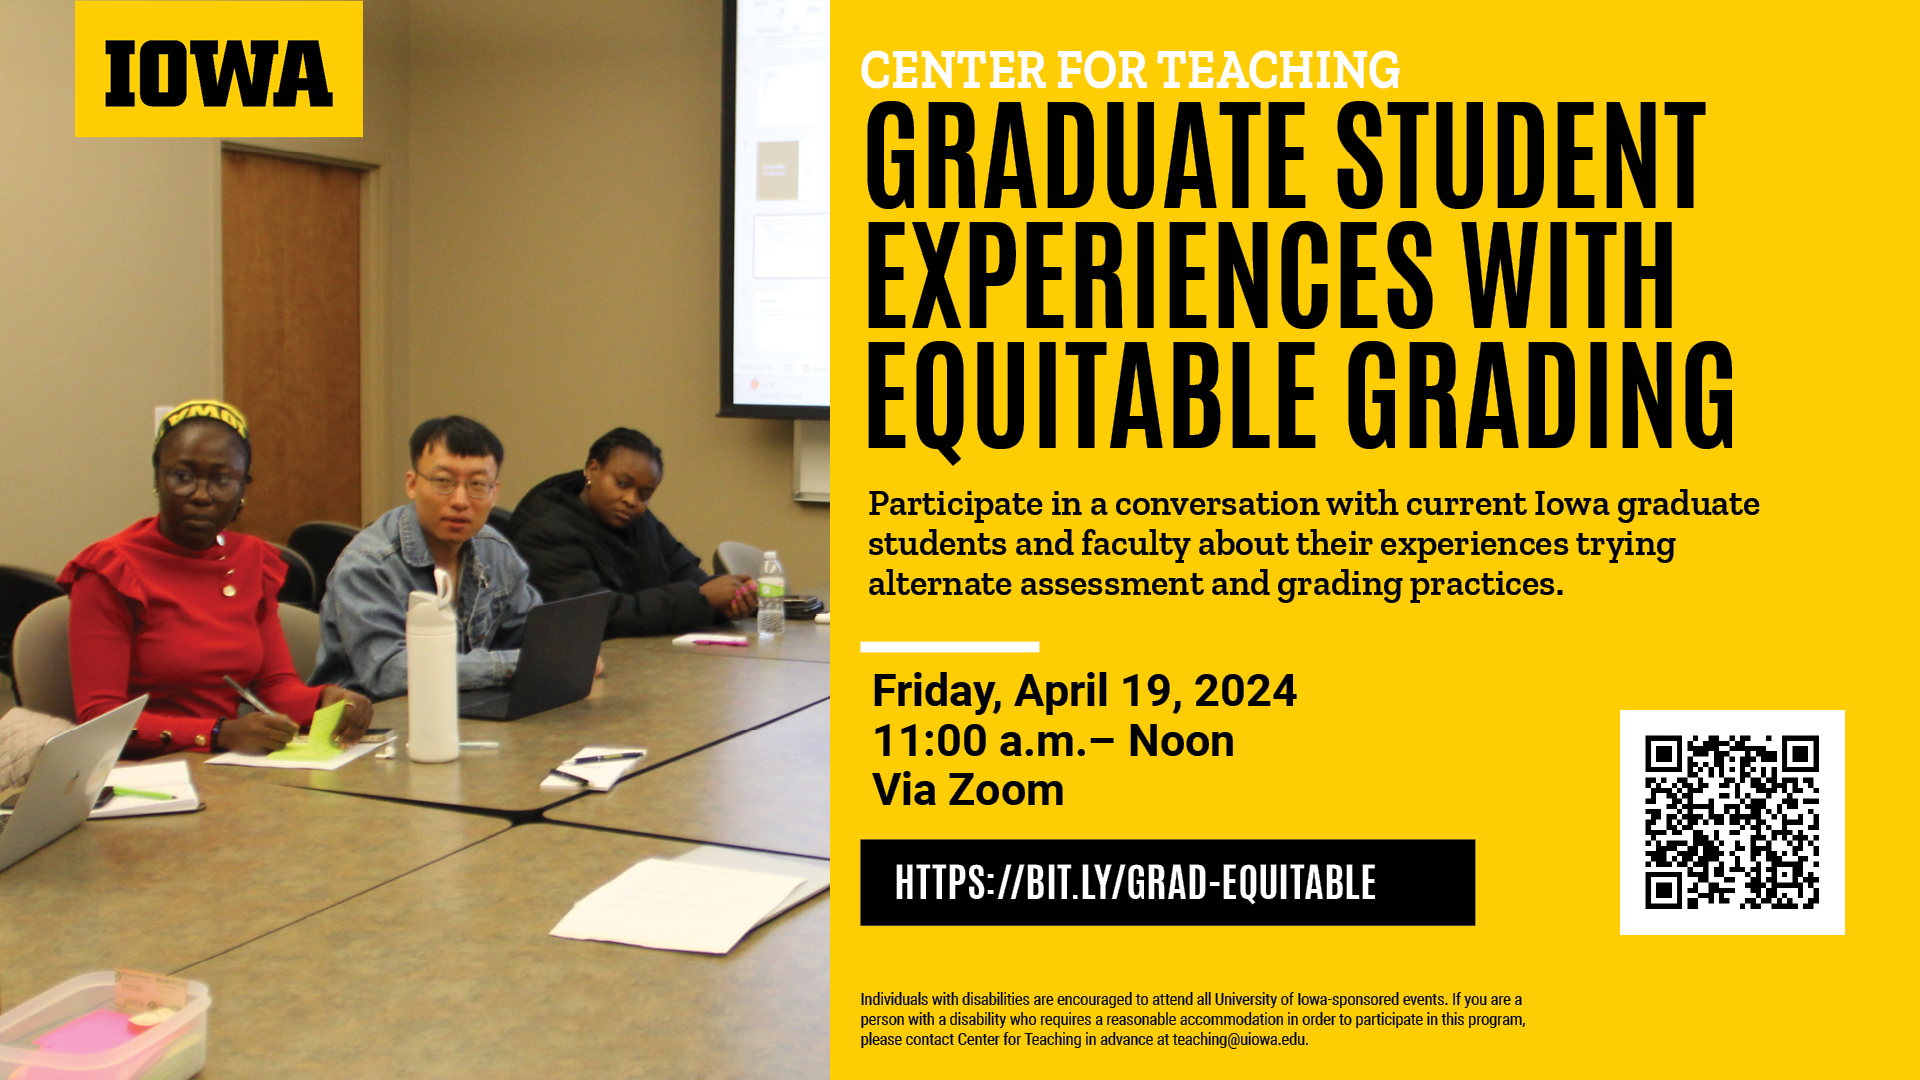 Grad Student Experiences with Equitable Grading on Friday, April 19, at 11 a.m.